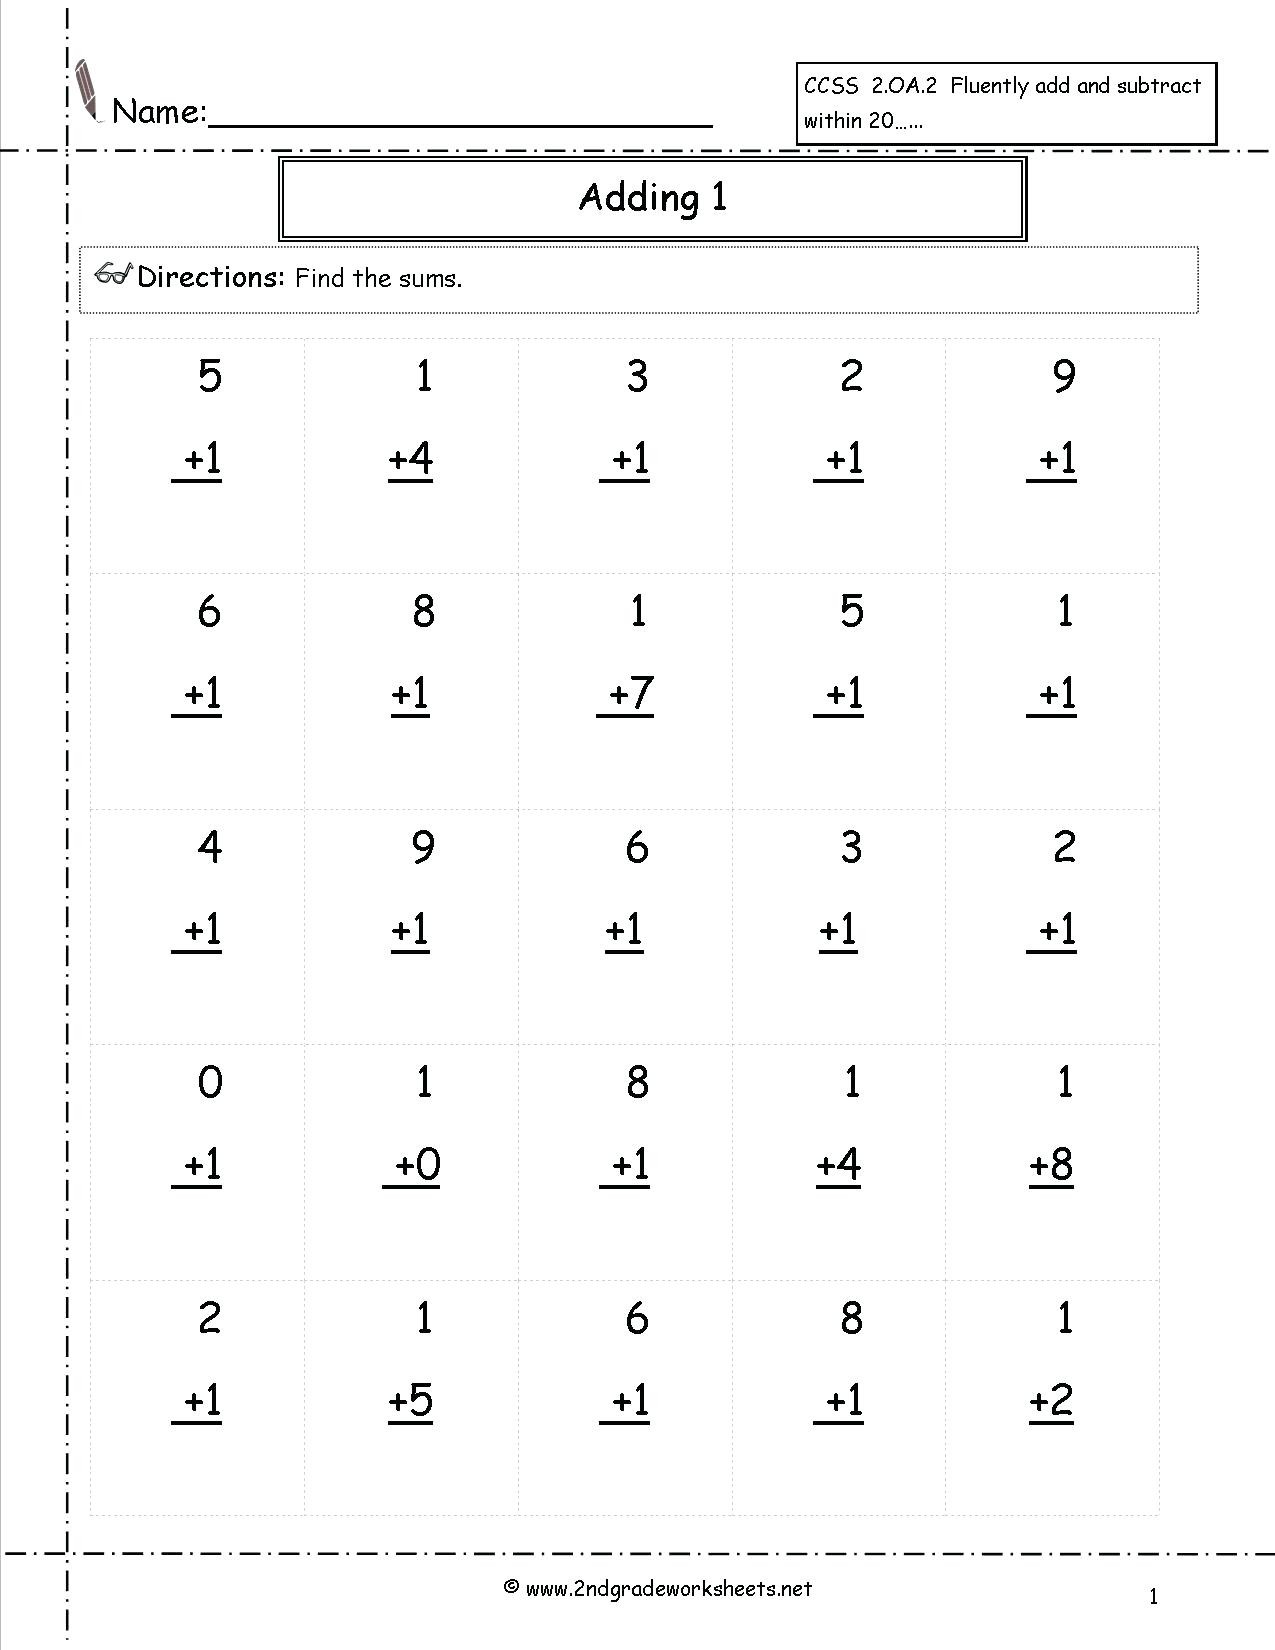 Free Math Worksheets First Grade 1 Subtraction Subtracting 1 Digit From 2 Digit No Regrouping